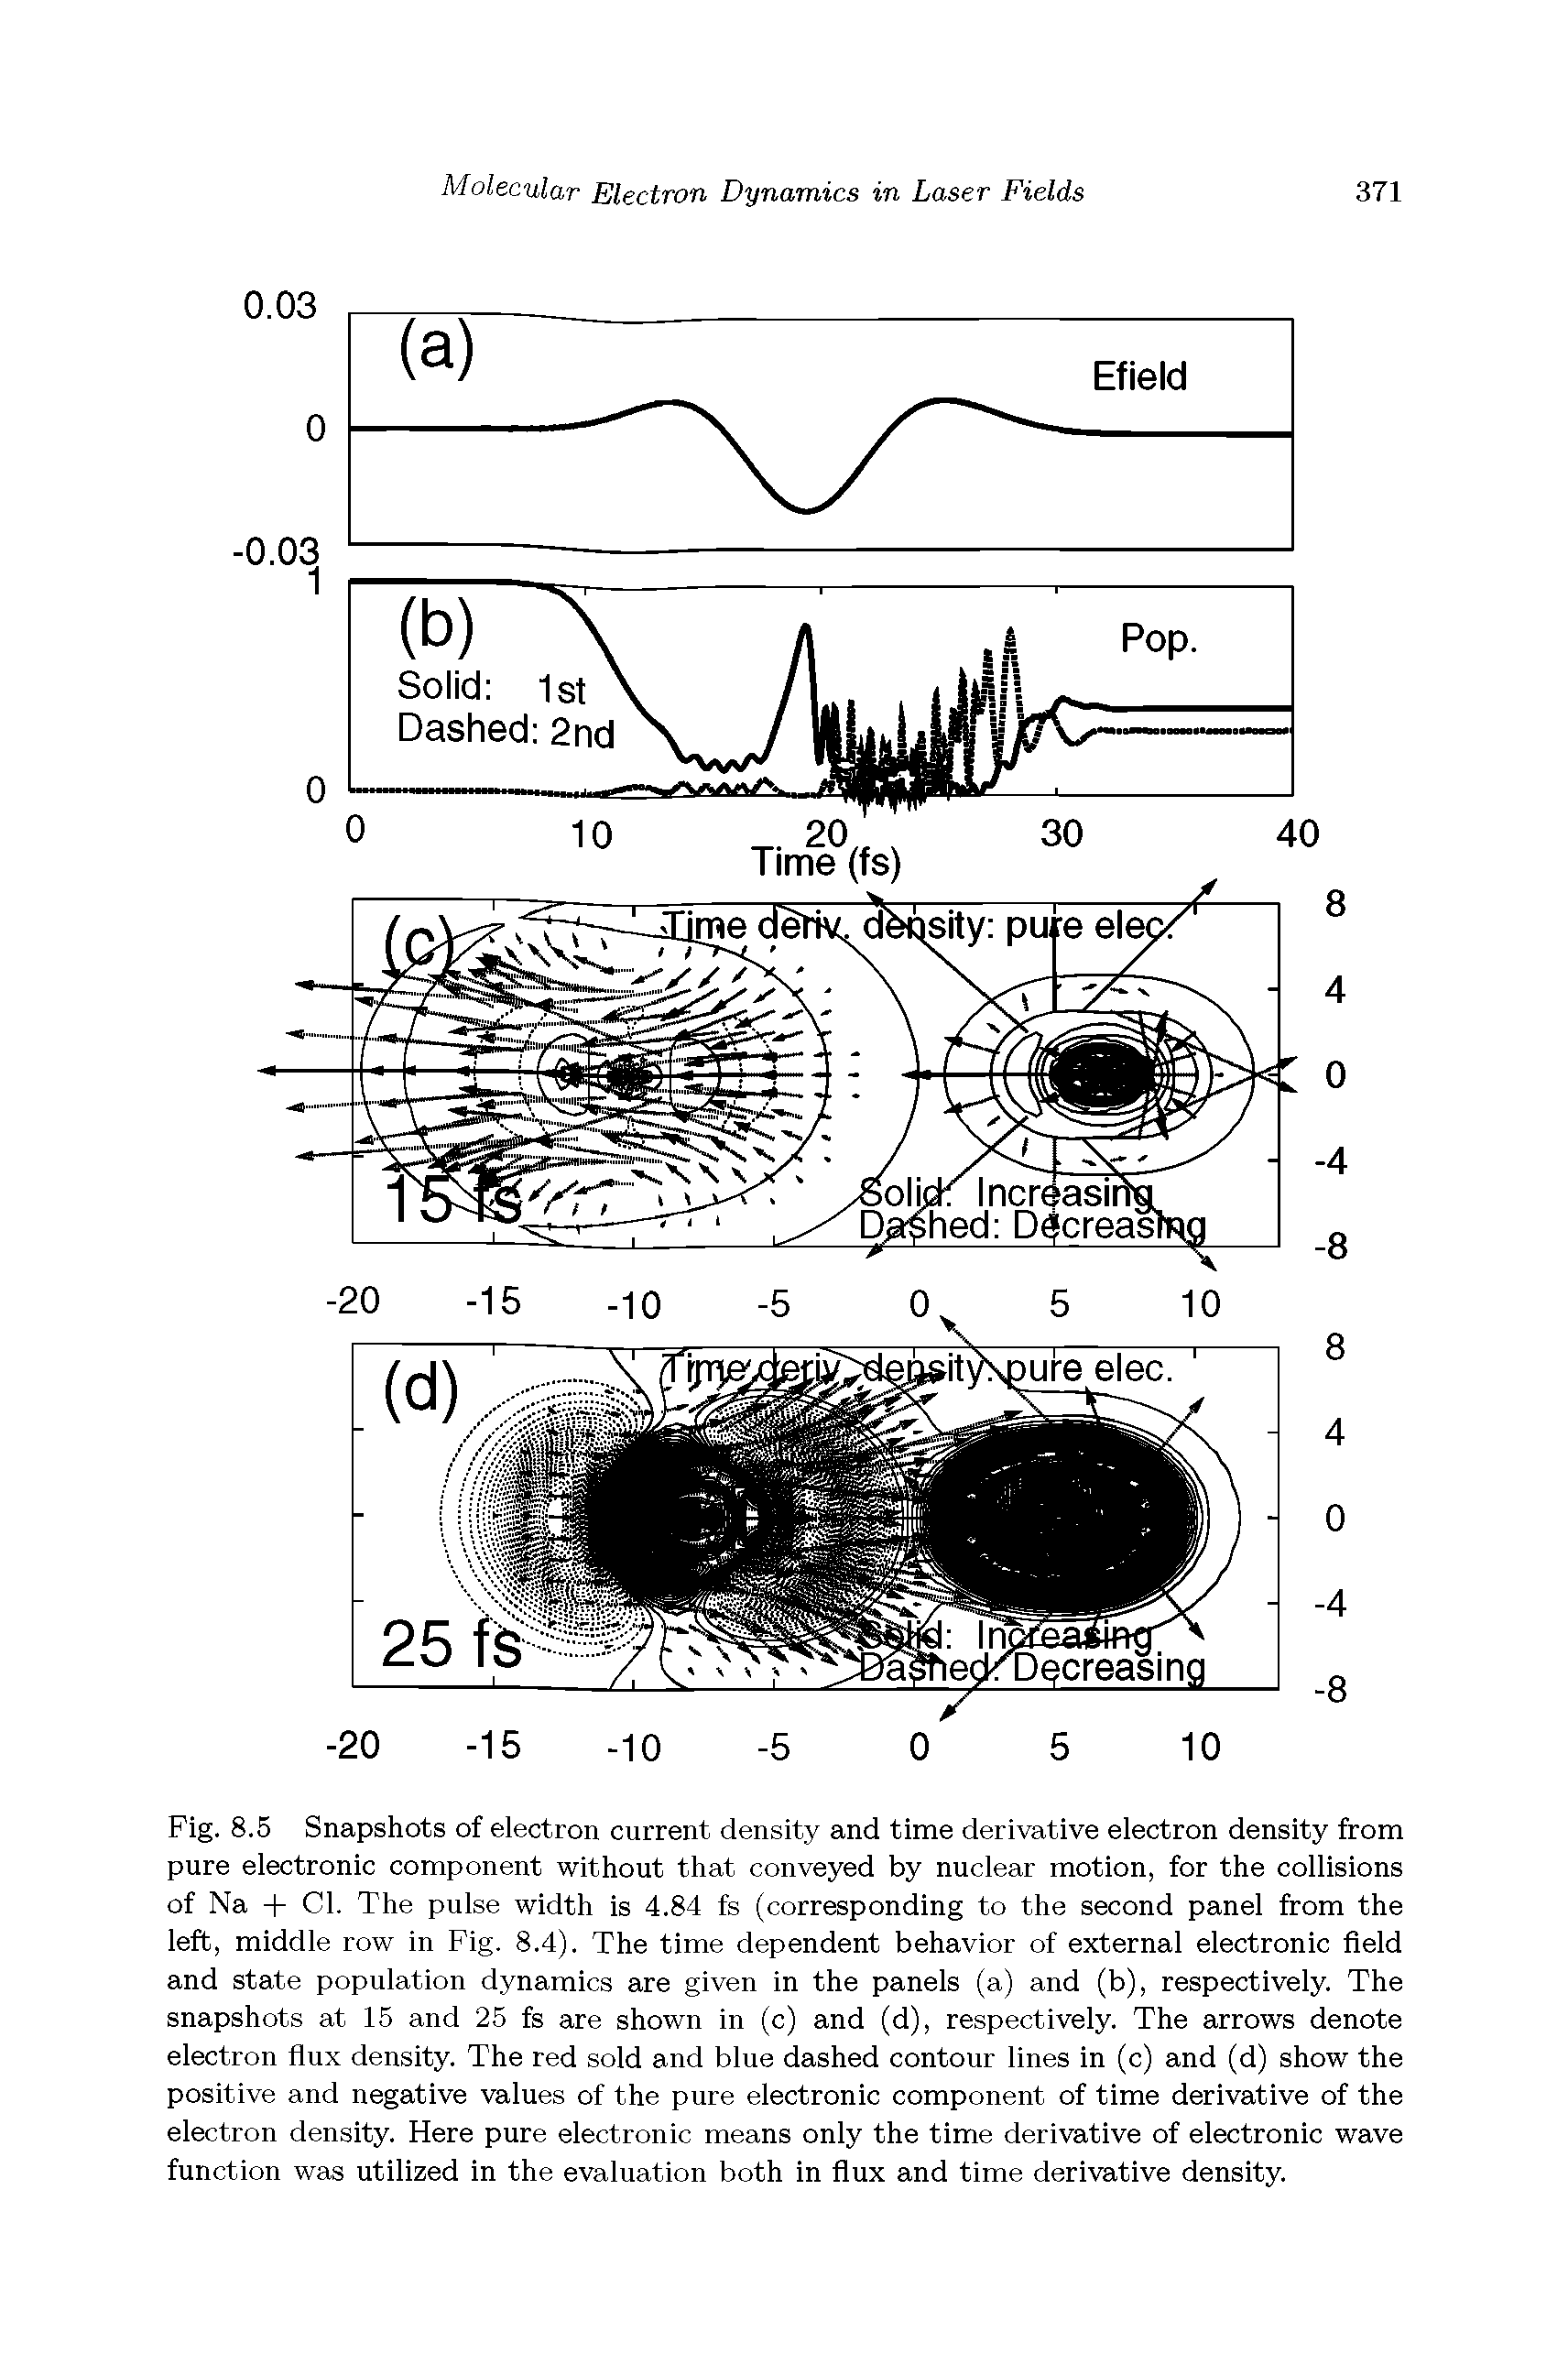 Fig. 8.5 Snapshots of electron current density and time derivative electron density from pure electronic component without that conveyed by nuclear motion, for the collisions of Na + Cl. The pulse width is 4.84 fs (corresponding to the second panel from the left, middle row in Fig. 8.4). The time dependent behavior of external electronic field and state population dynamics are given in the panels (a) and (b), respectively. The snapshots at 15 and 25 fs are shown in (c) and (d), respectively. The arrows denote electron flux density. The red sold and blue dashed contour lines in (c) and (d) show the positive and negative values of the pure electronic component of time derivative of the electron density. Here pure electronic means only the time derivative of electronic wave function was utilized in the evaluation both in flux and time derivative density.